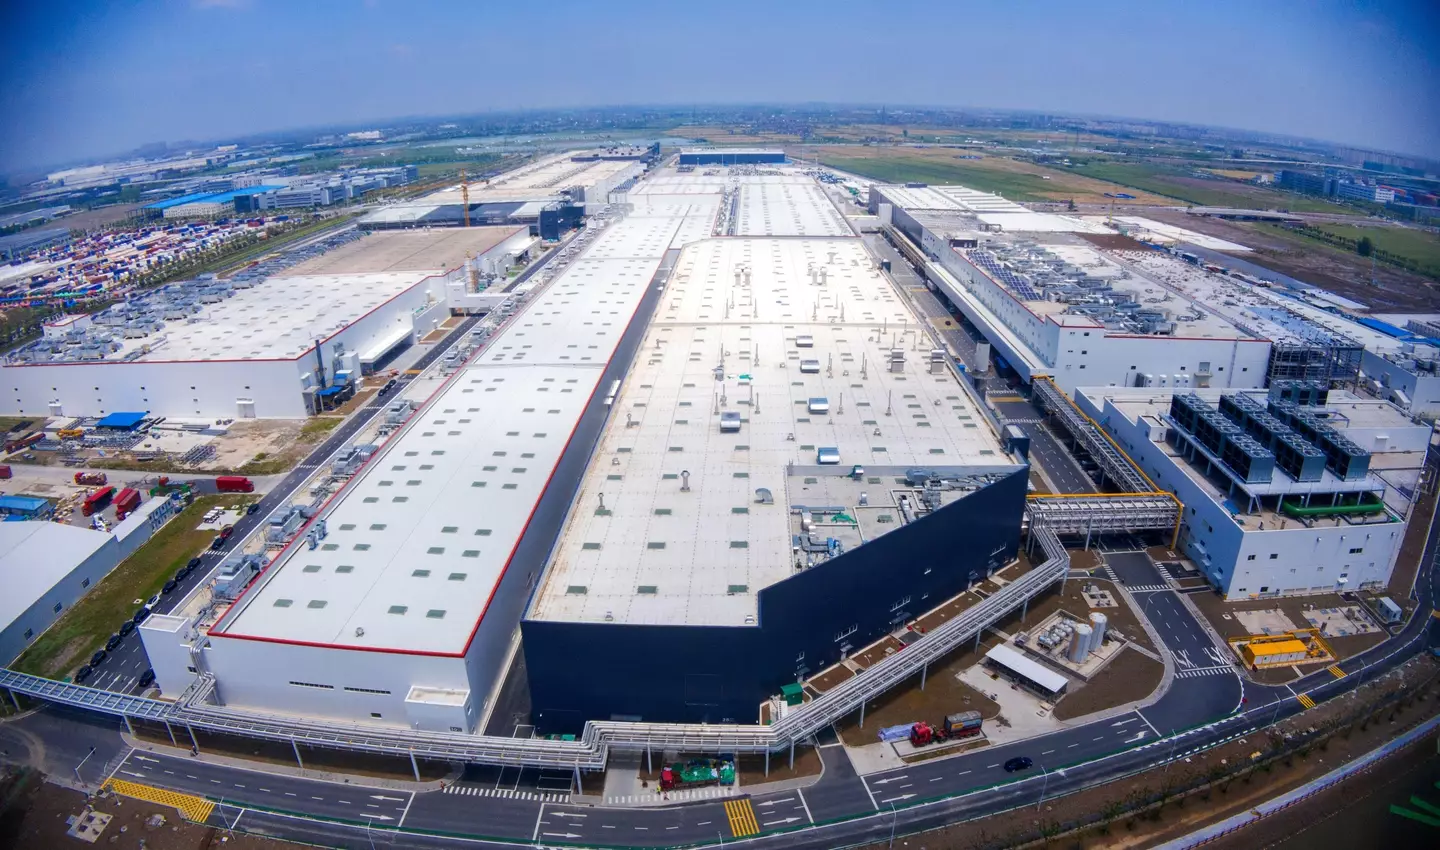 Car production at the Tesla Gigafactory in Shanghai continued through lockdowns.